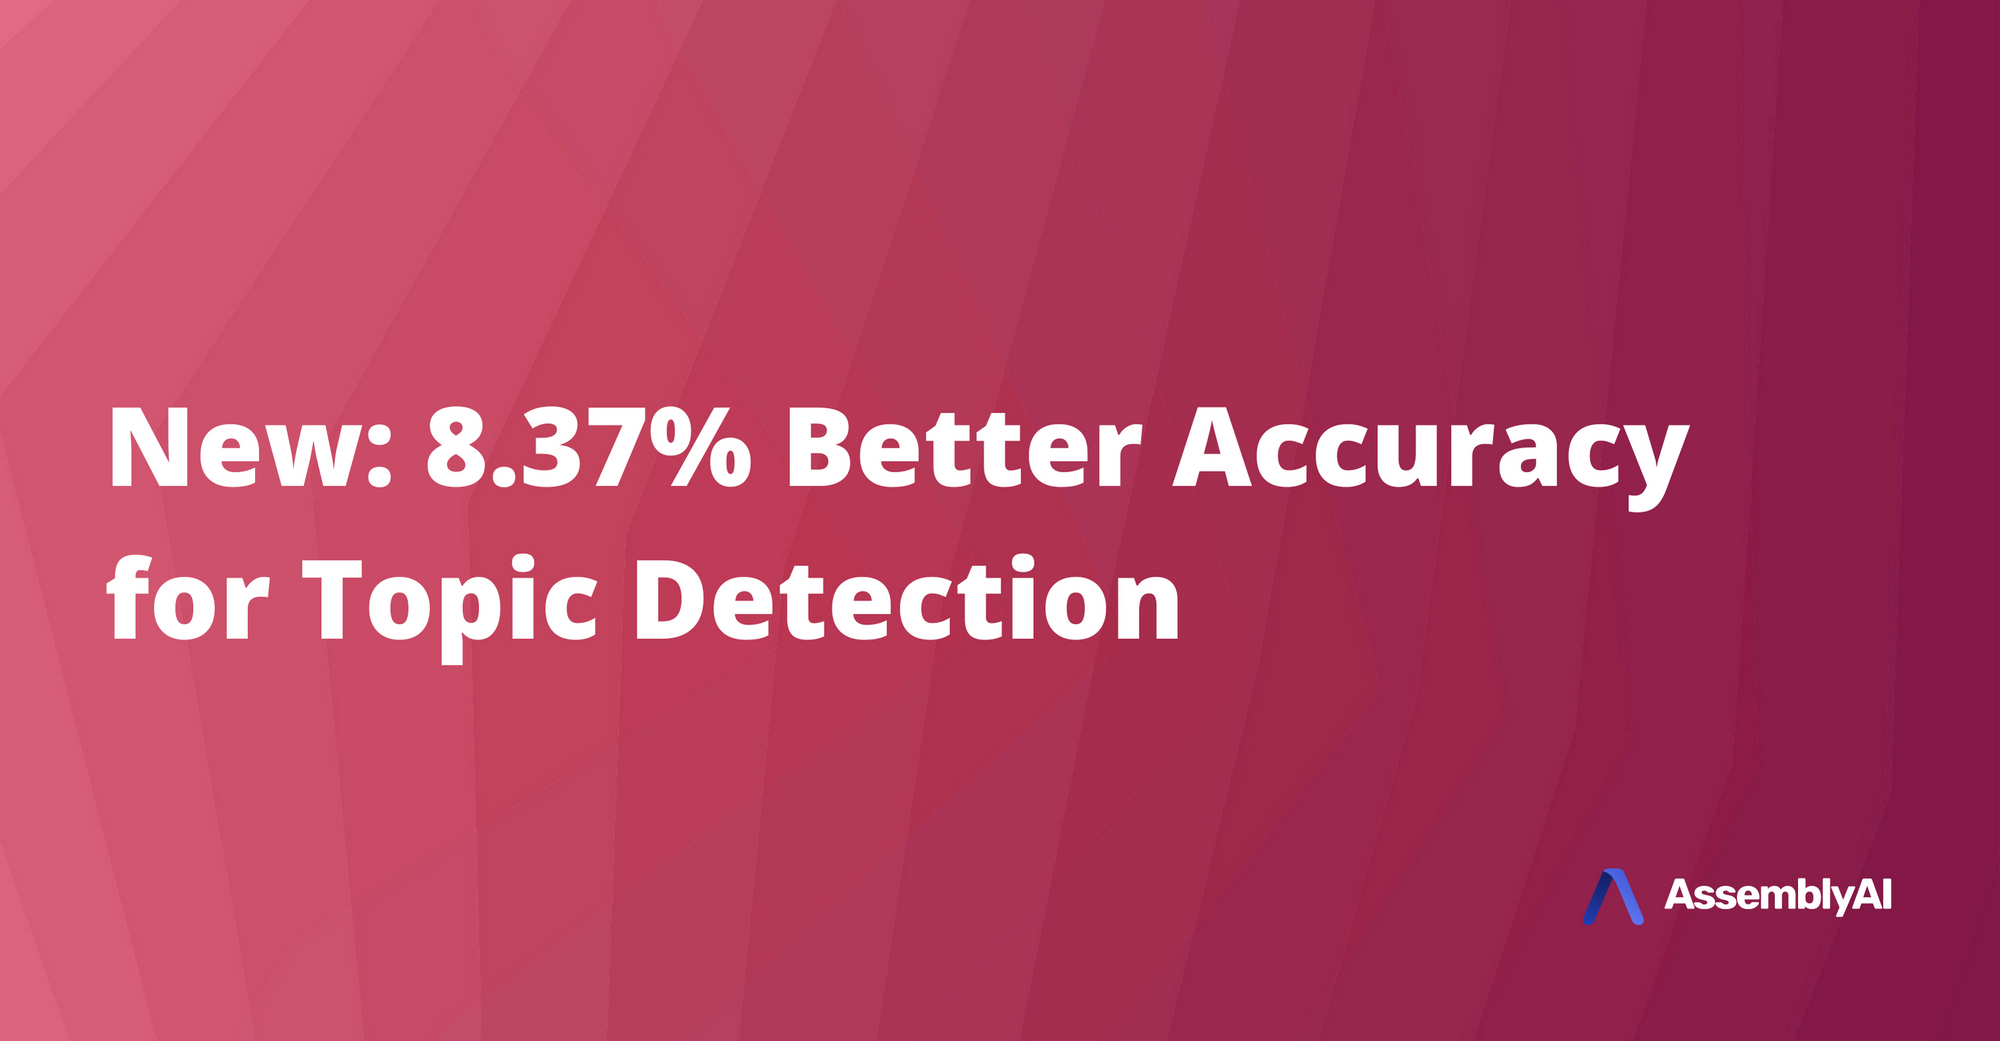 New - 8.37% Better Accuracy for Topic Detection and IAB Classification with V4 Update